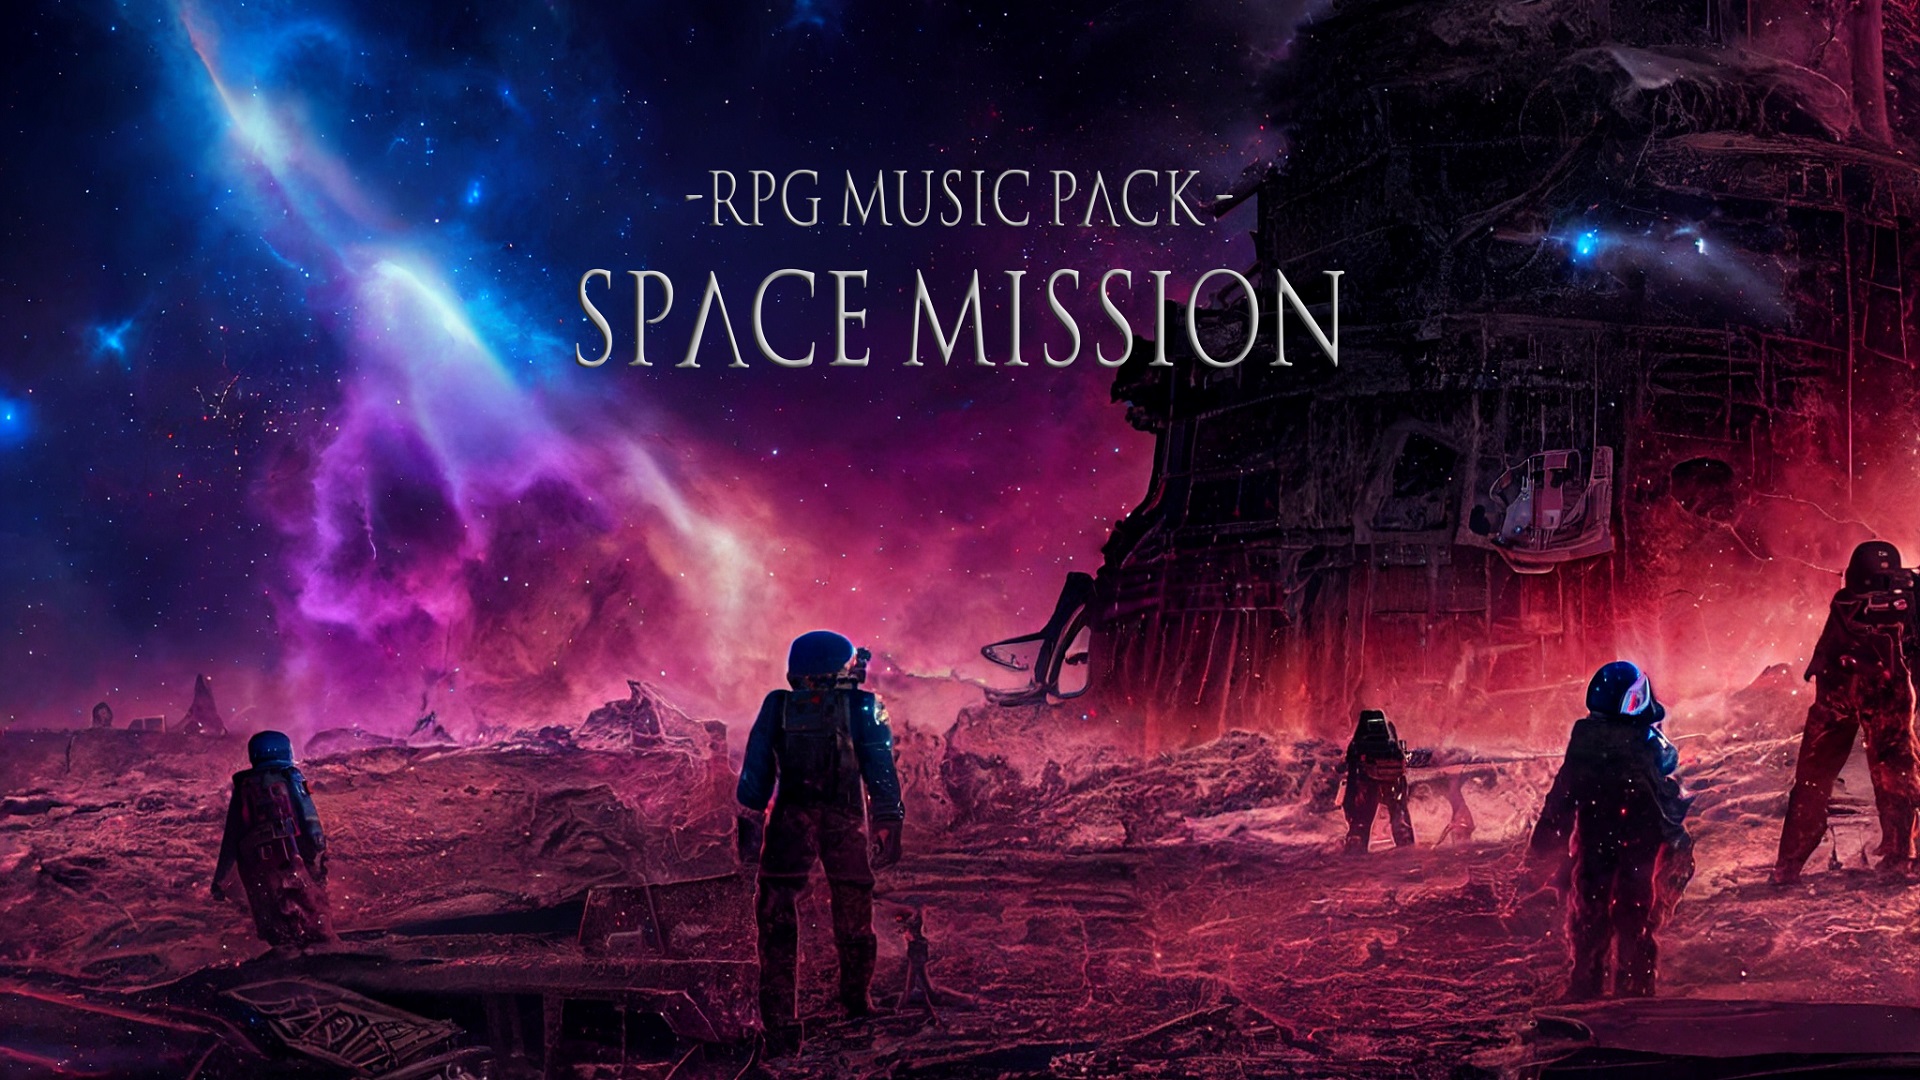 RPG Music Pack: Space Mission